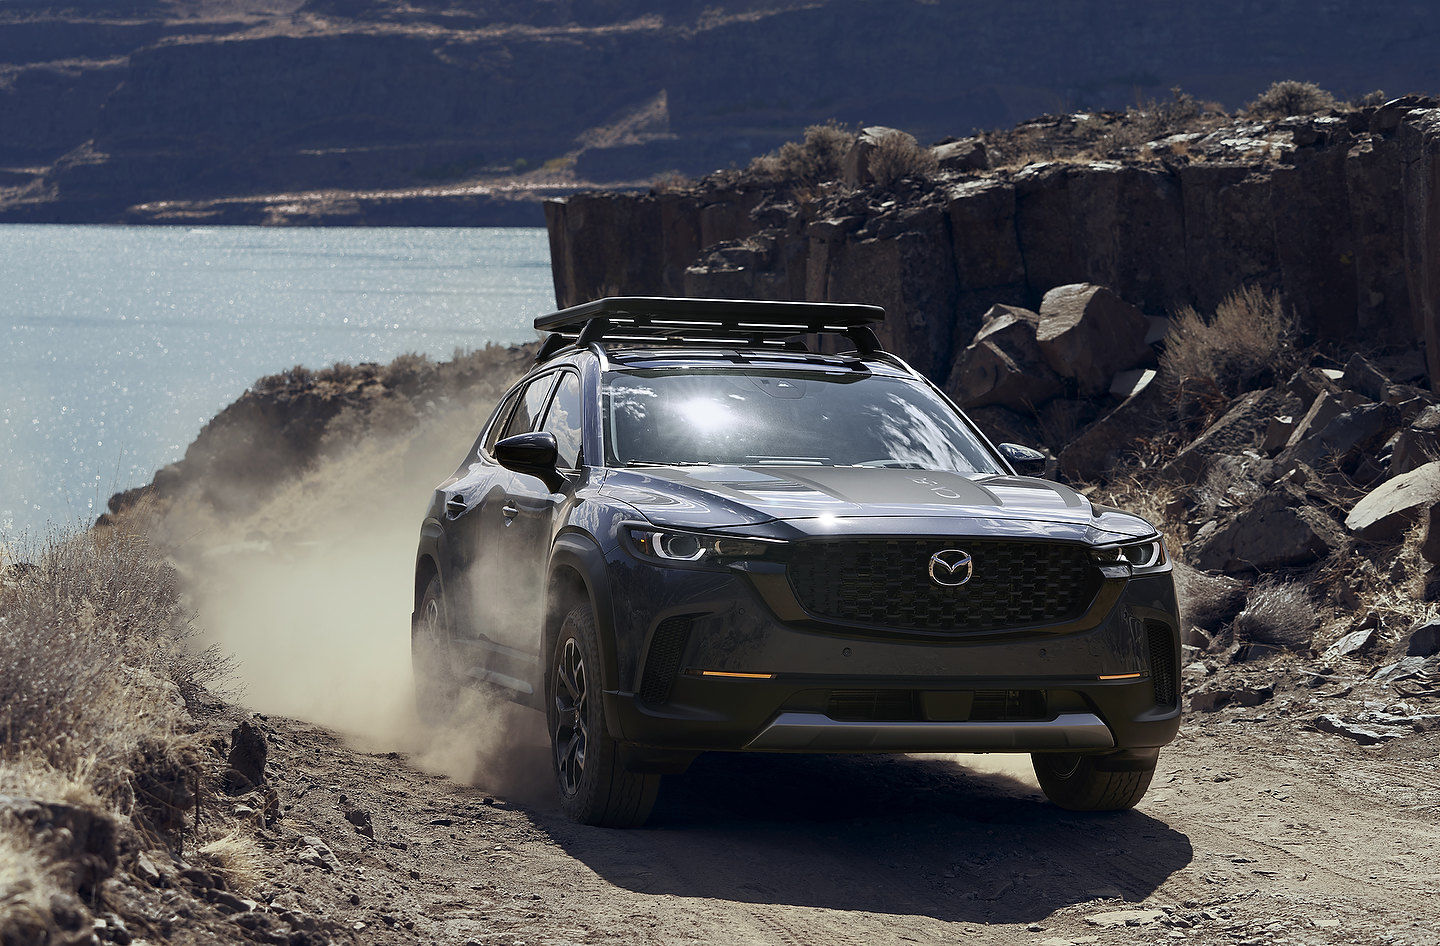 The 2023 Mazda CX-50 is a rugged and refined SUV